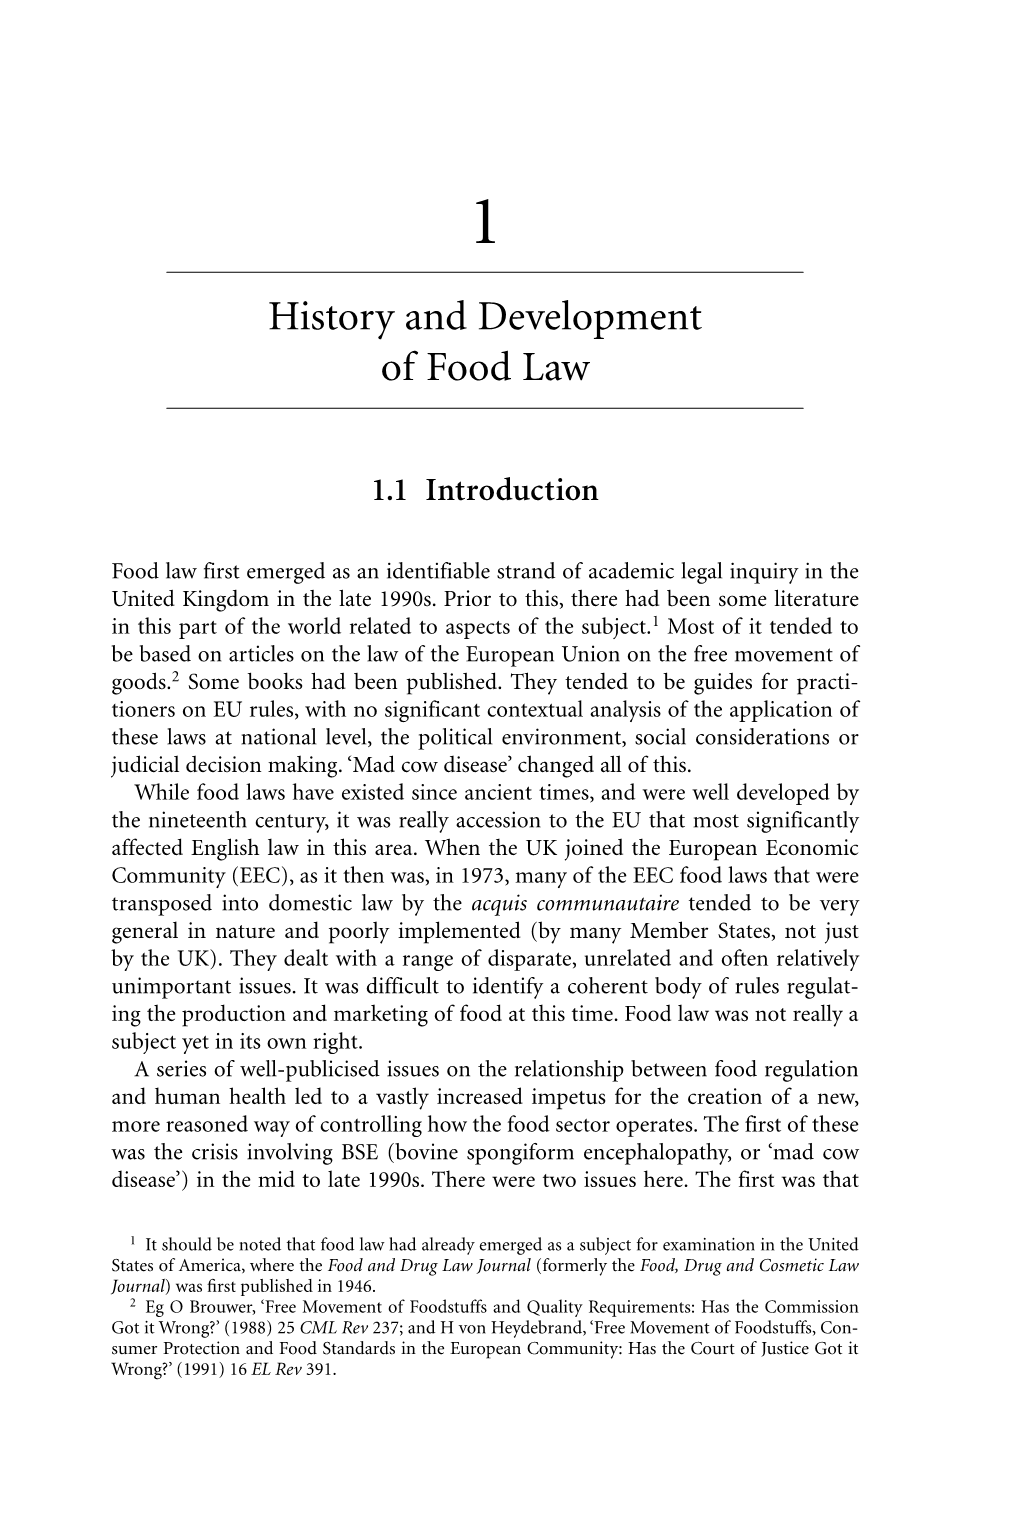 History and Development of Food Law